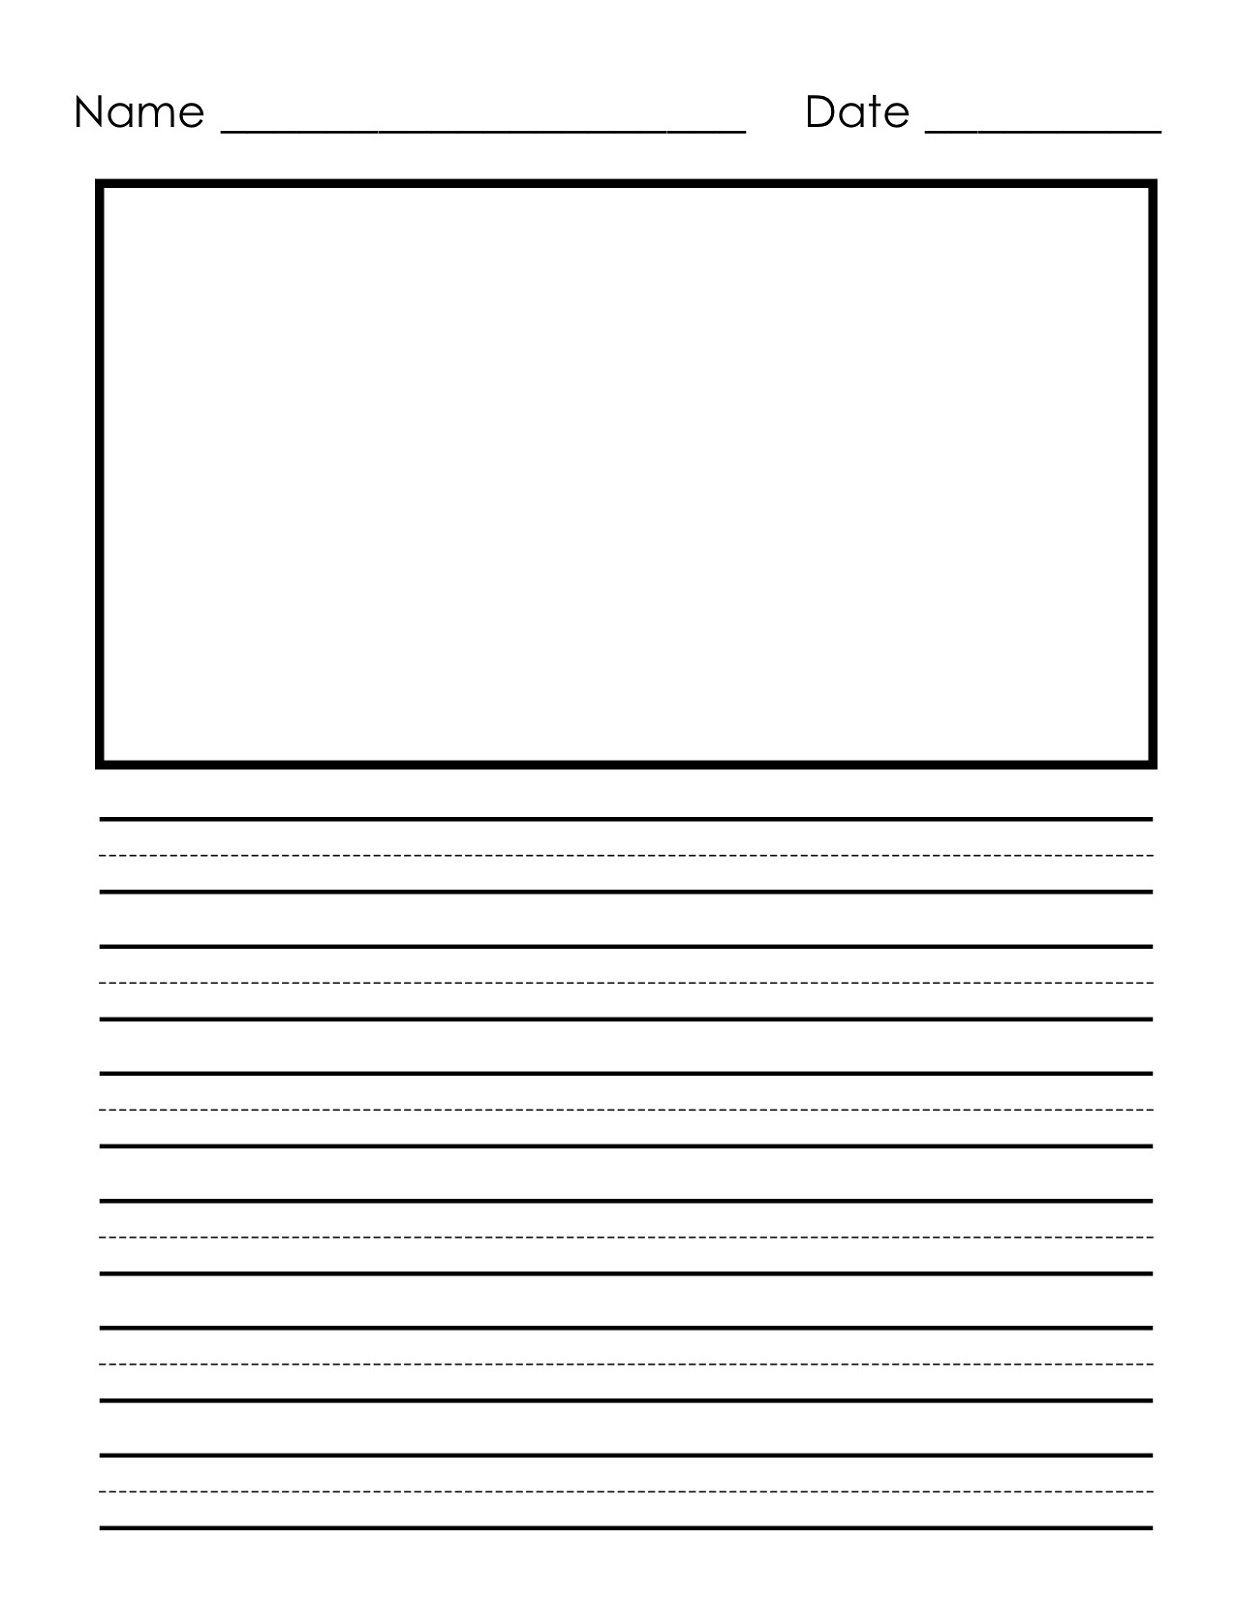 Writing Paper Printable For Children | Notebook Paper Templates - Elementary Lined Paper Printable Free